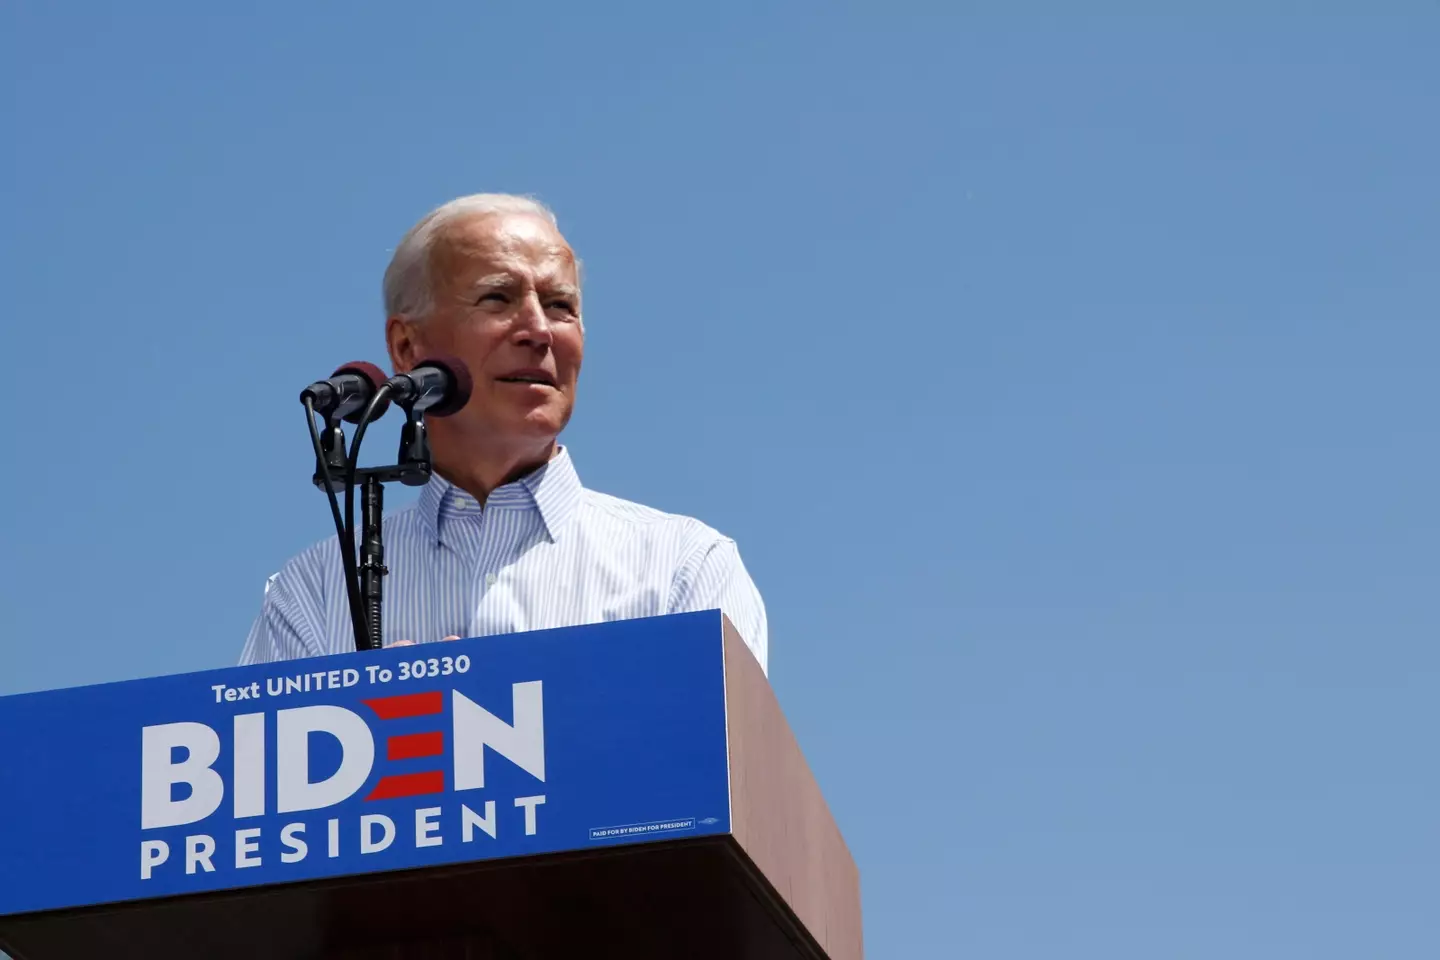 Biden was addressing an audience of teachers and union members at the Democratic National Committee when he made the remark.